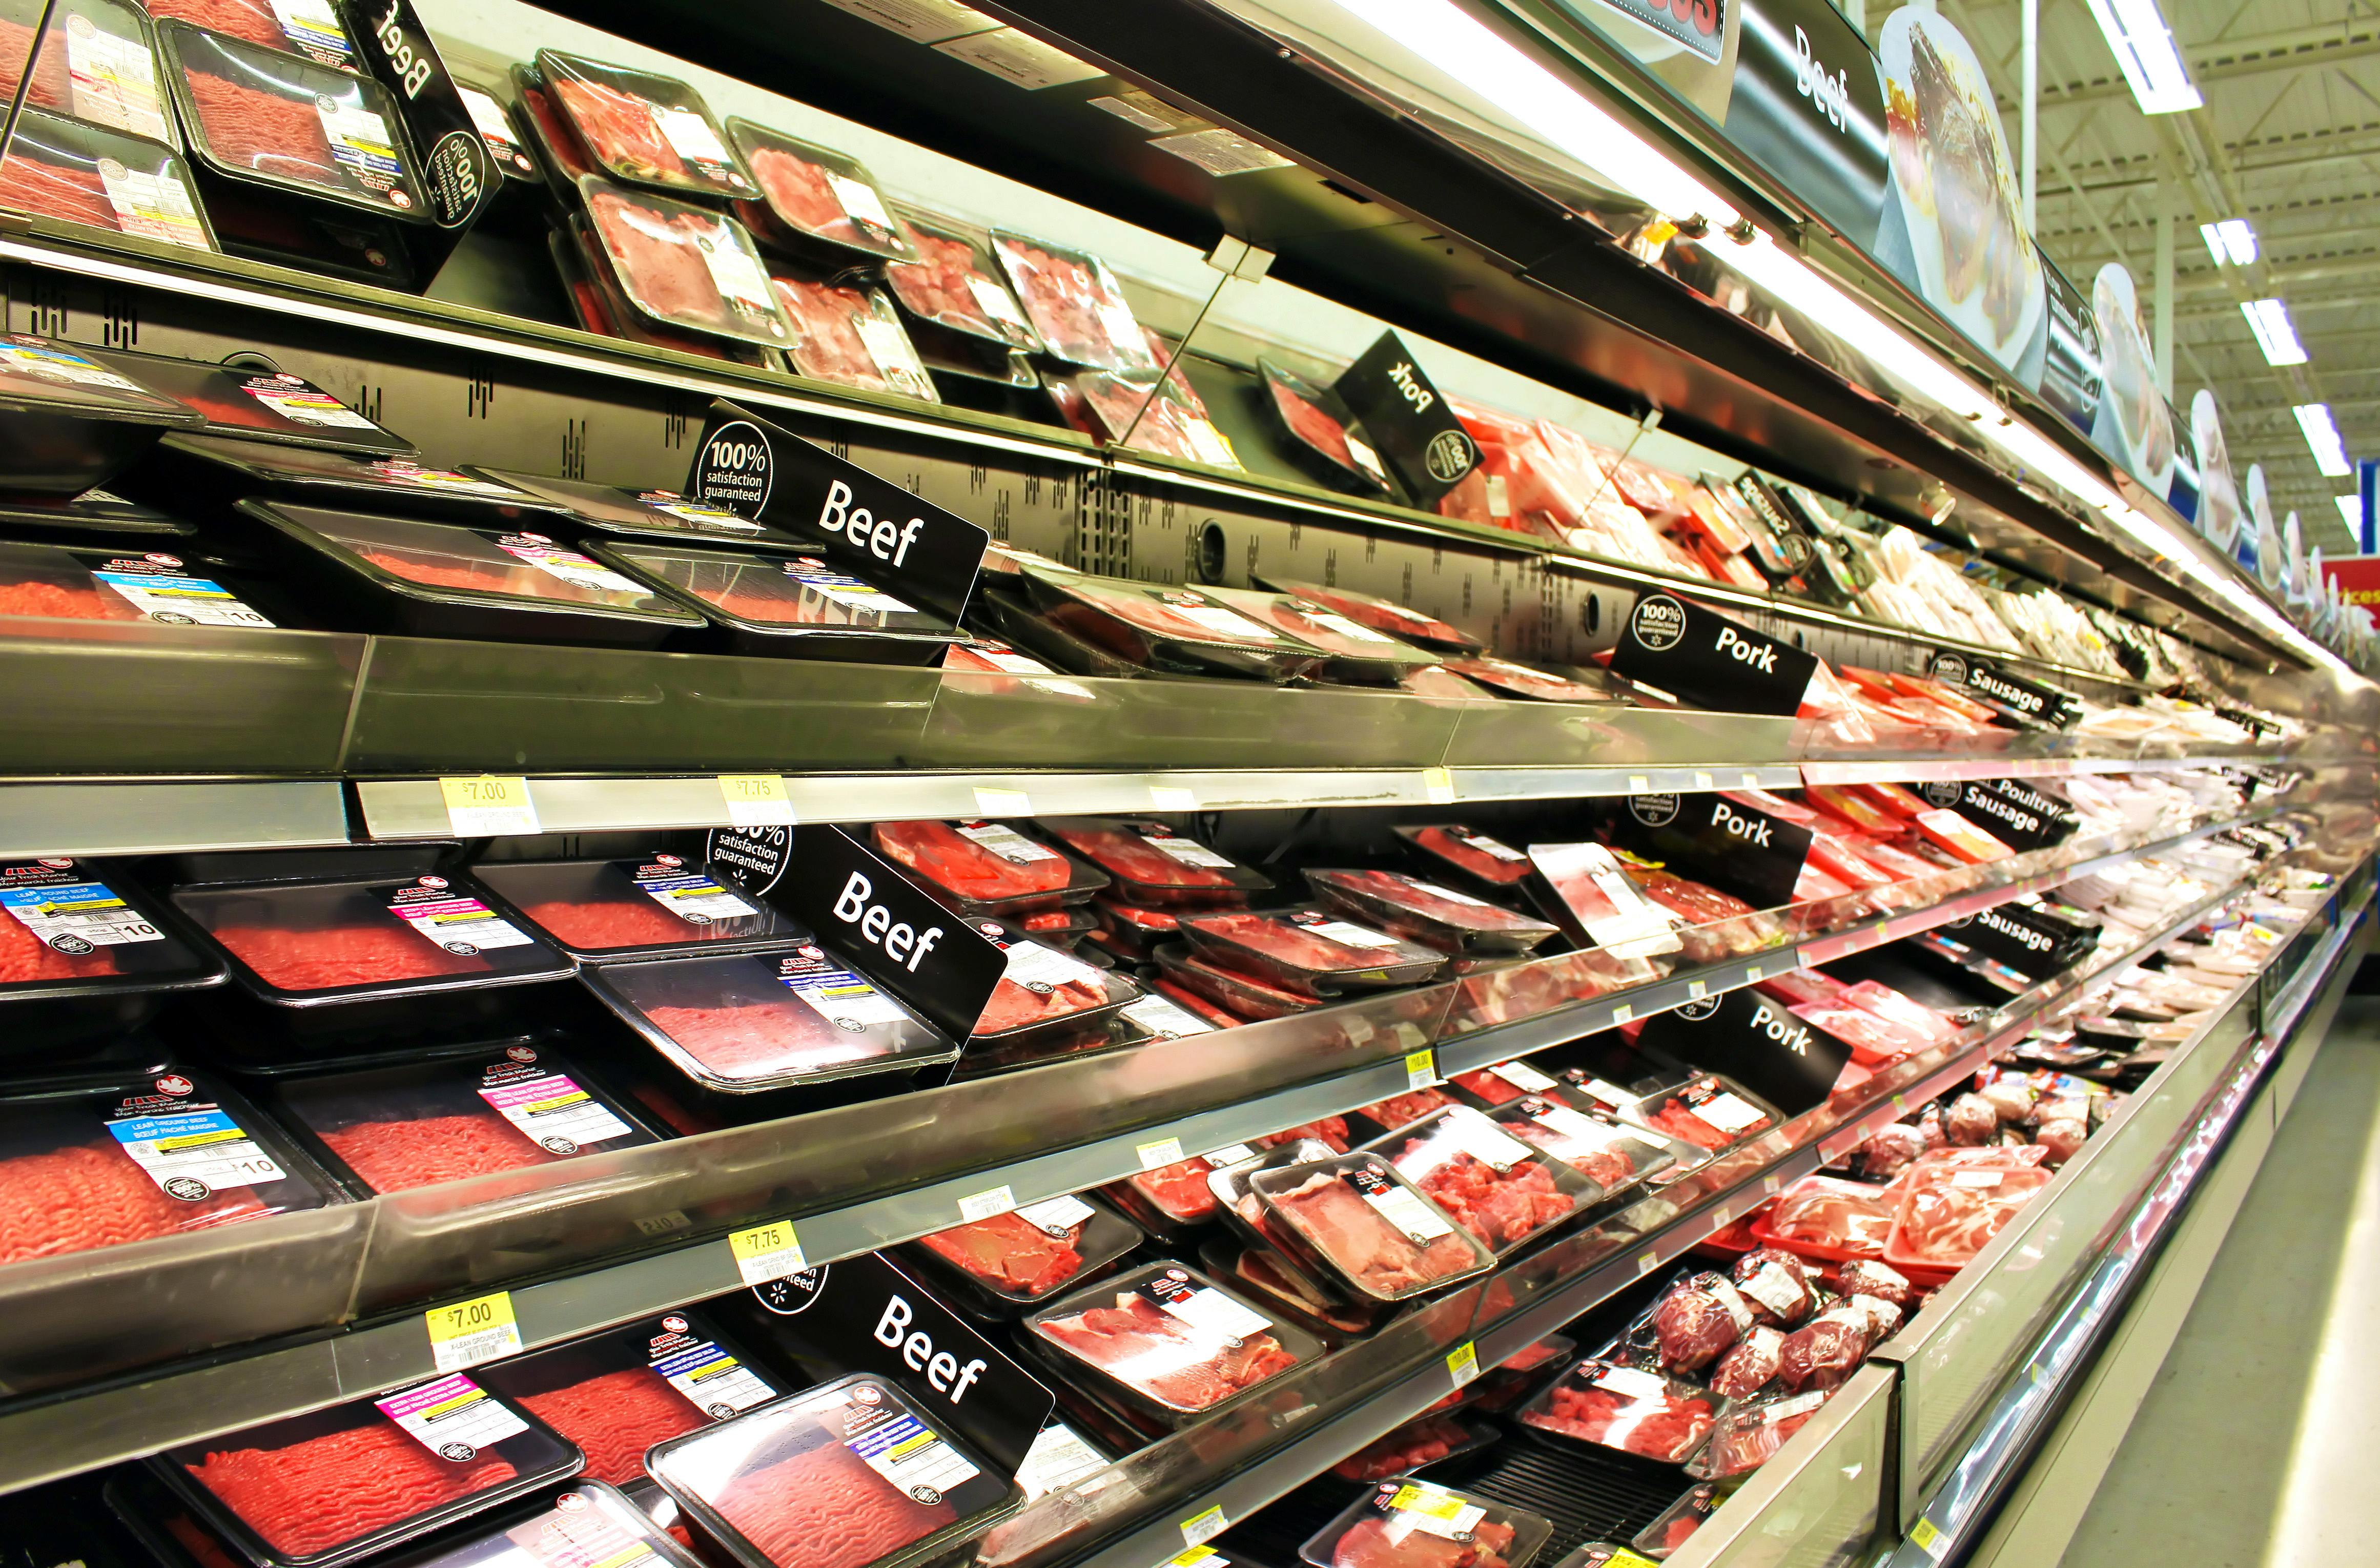 Cargill buys beef, pork plants as grocery store demand for pre-cut